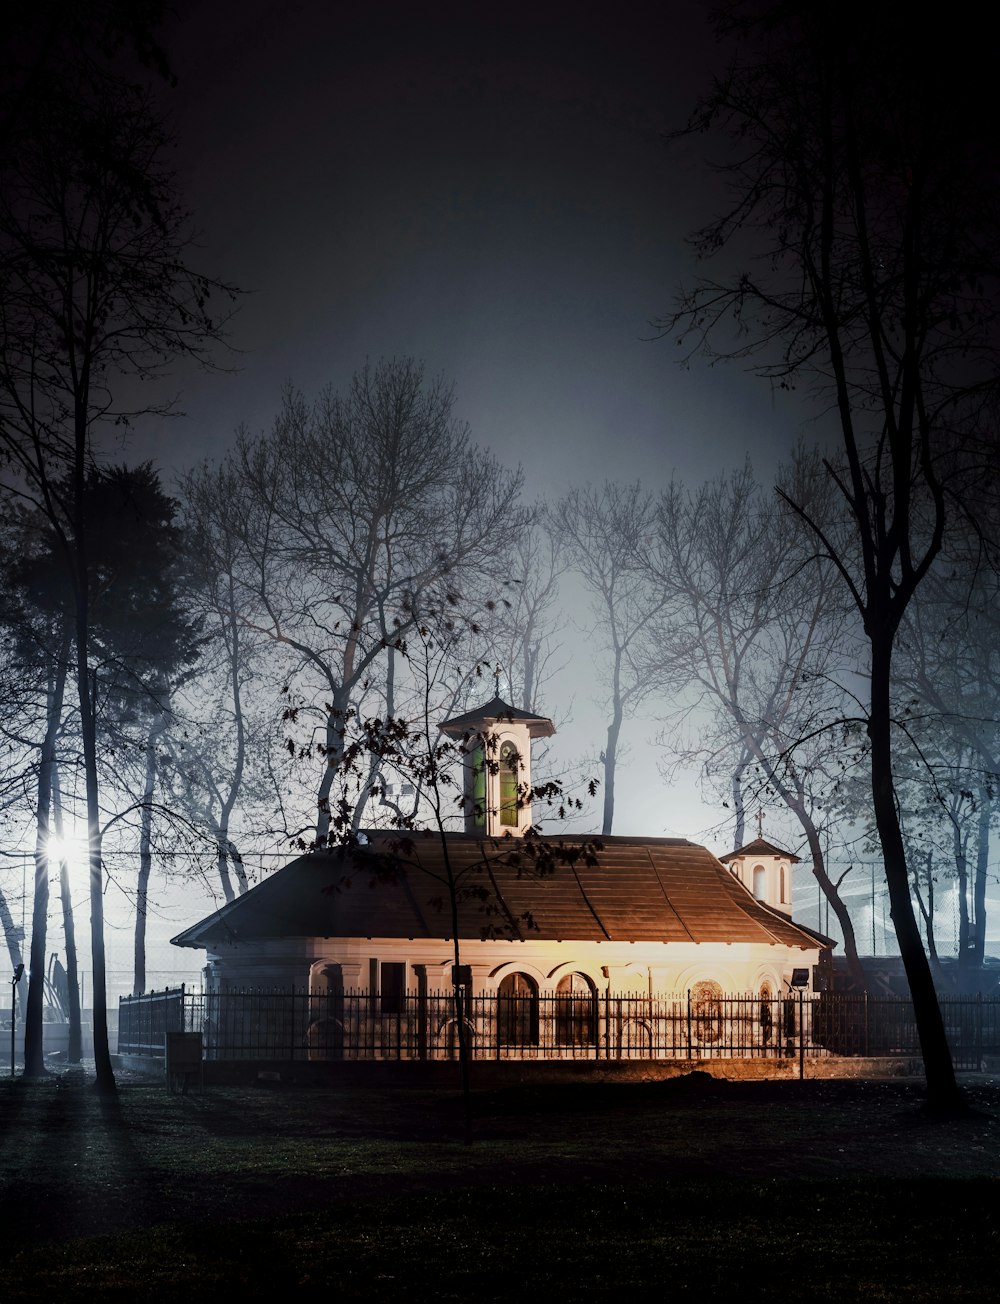 brown wooden house near bare trees during night time